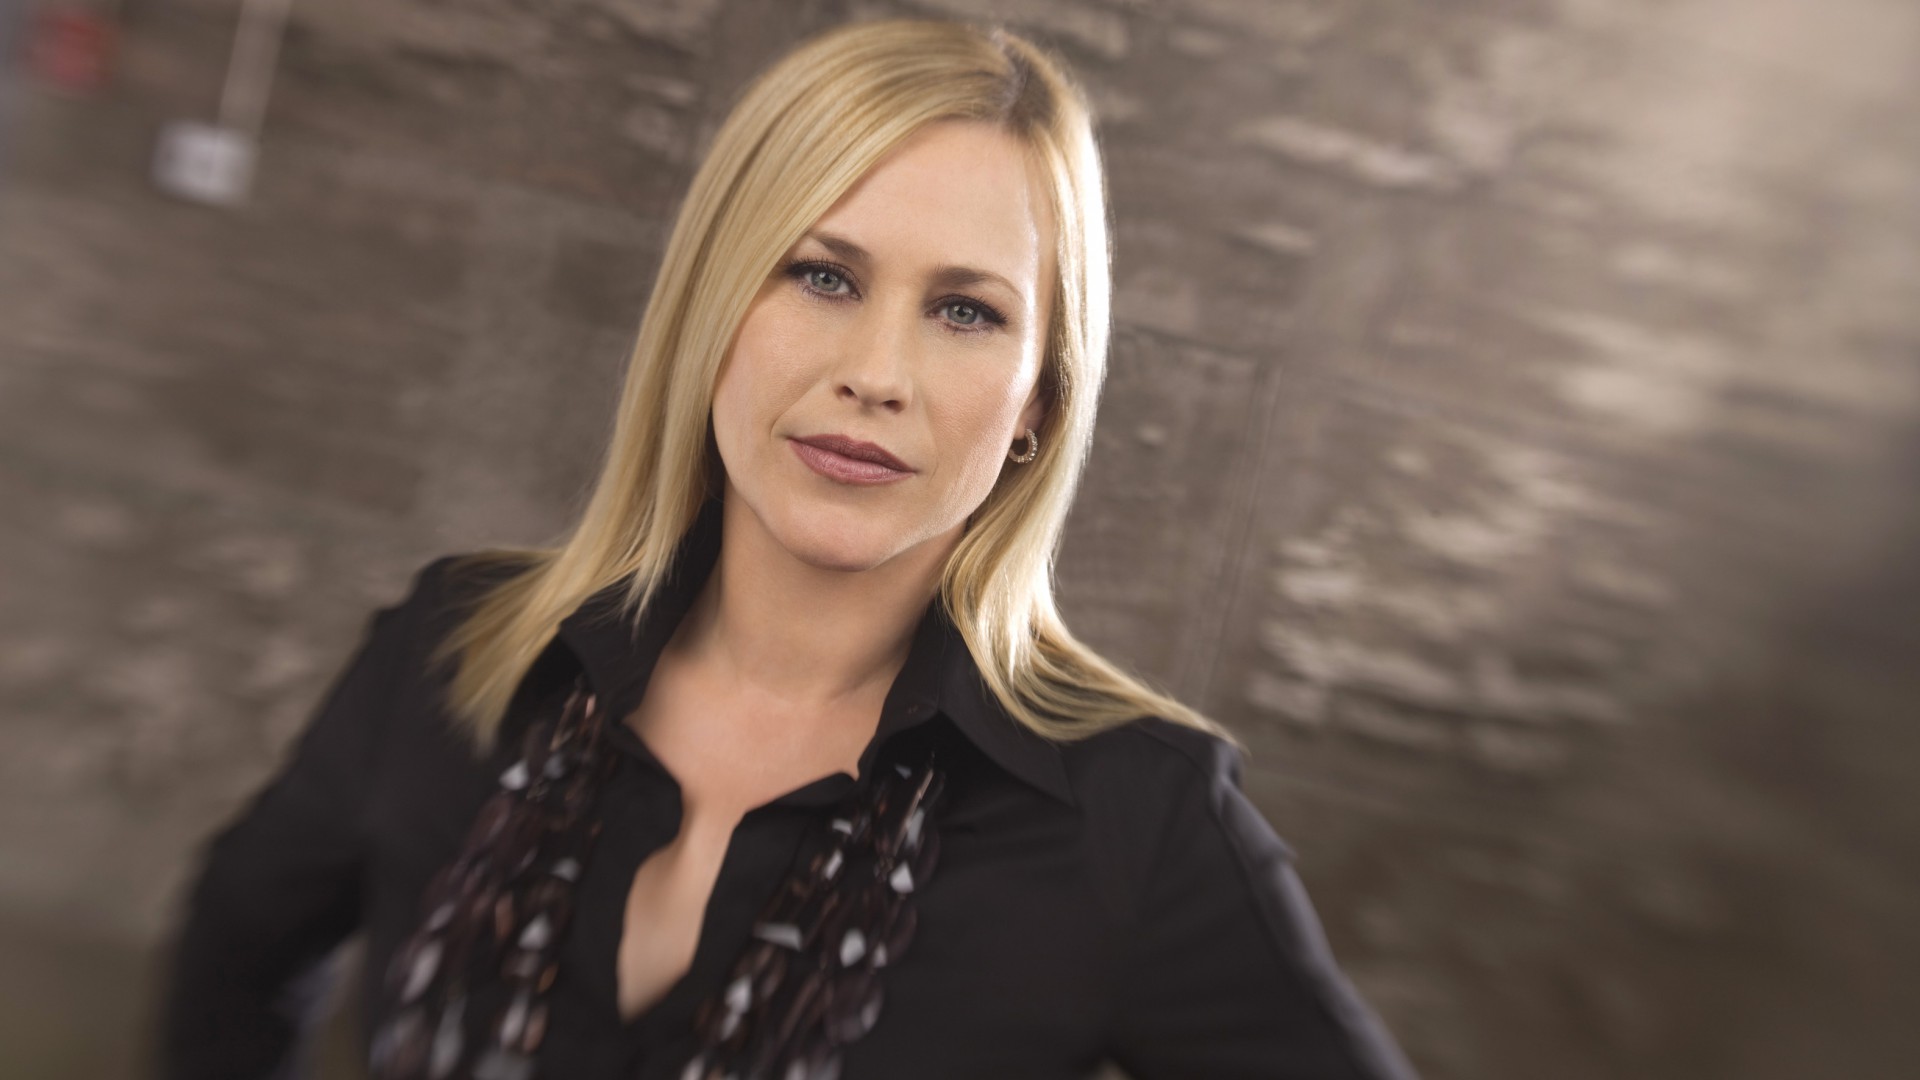 Patricia Arquette, Most Popular Celebs in 2015, actress (horizontal)